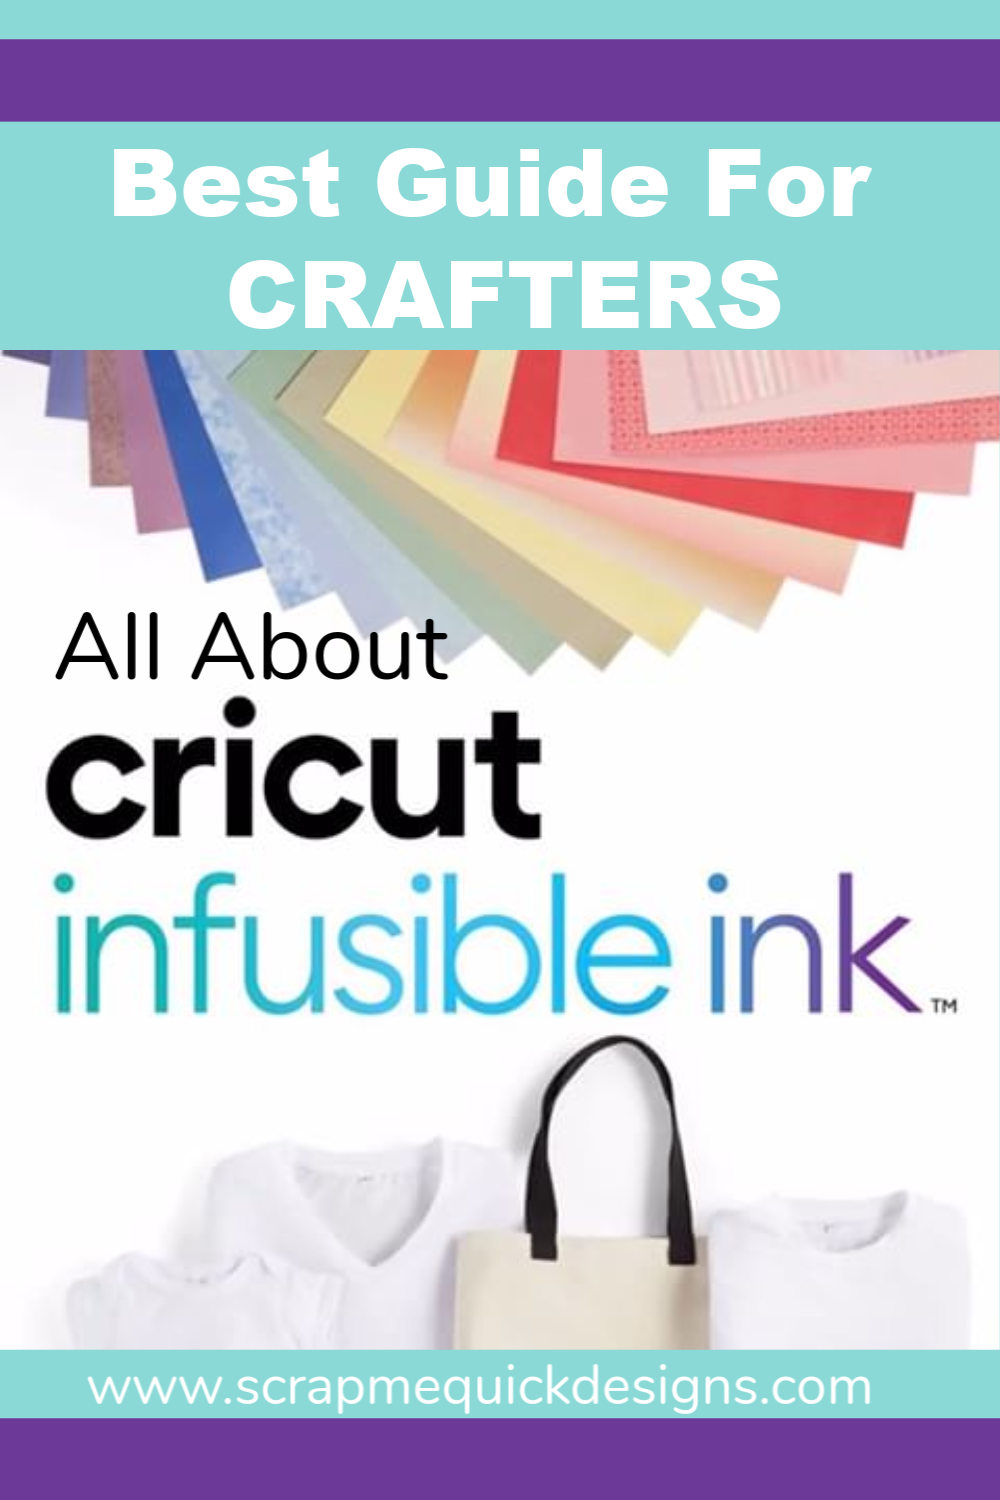 Best Guide for Crafters About Cricut Infusible Ink